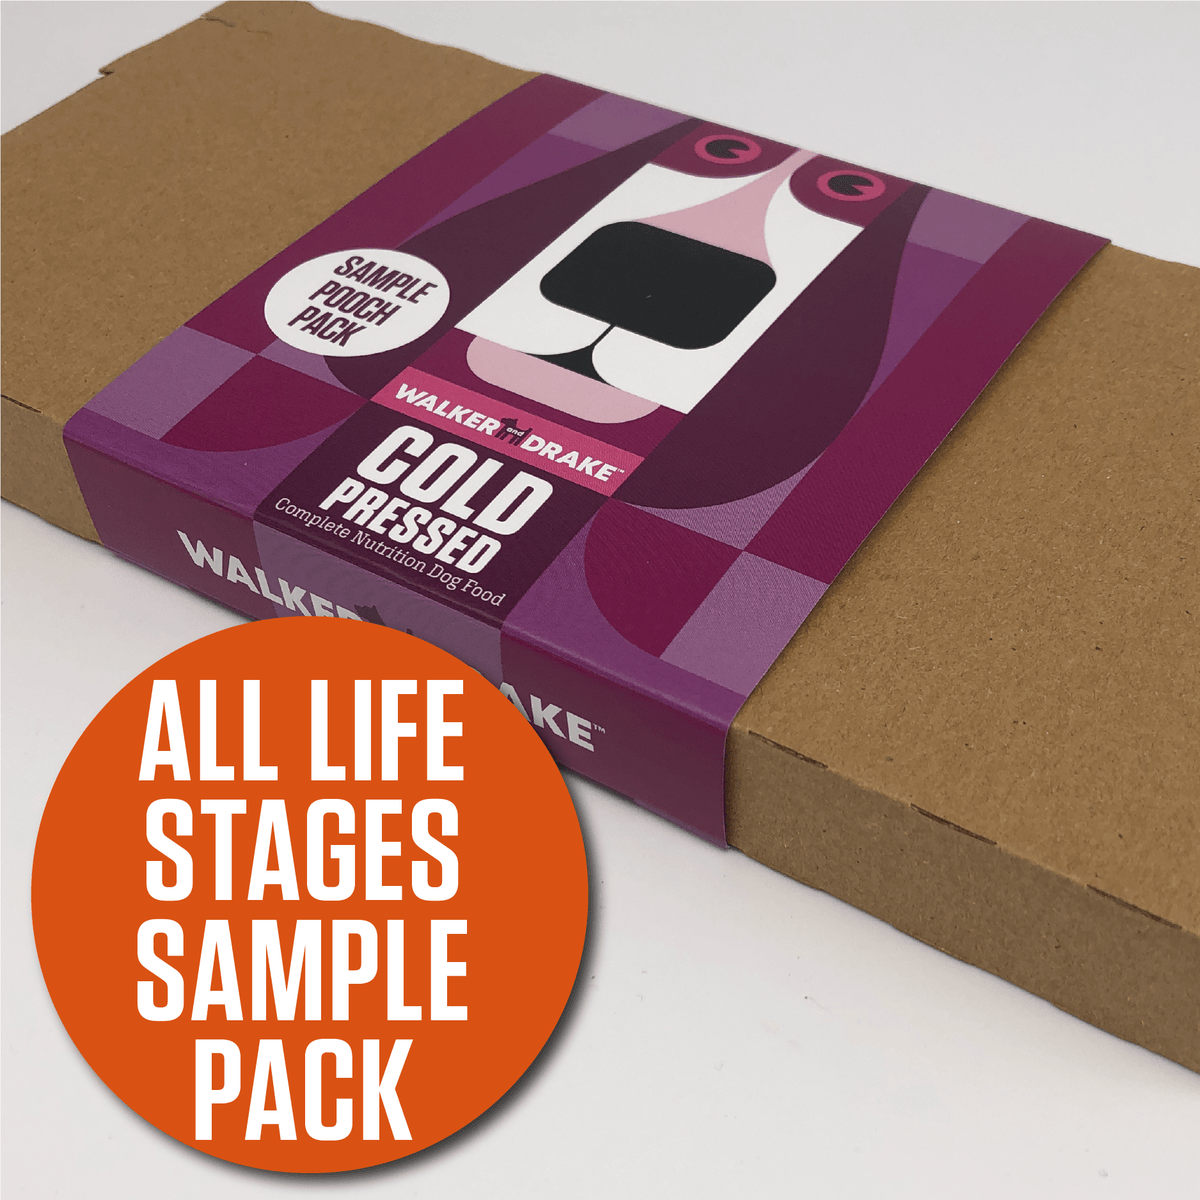 ALL LIFE STAGES - SAMPLE PACK - Duck, Ocean Fish & Chicken